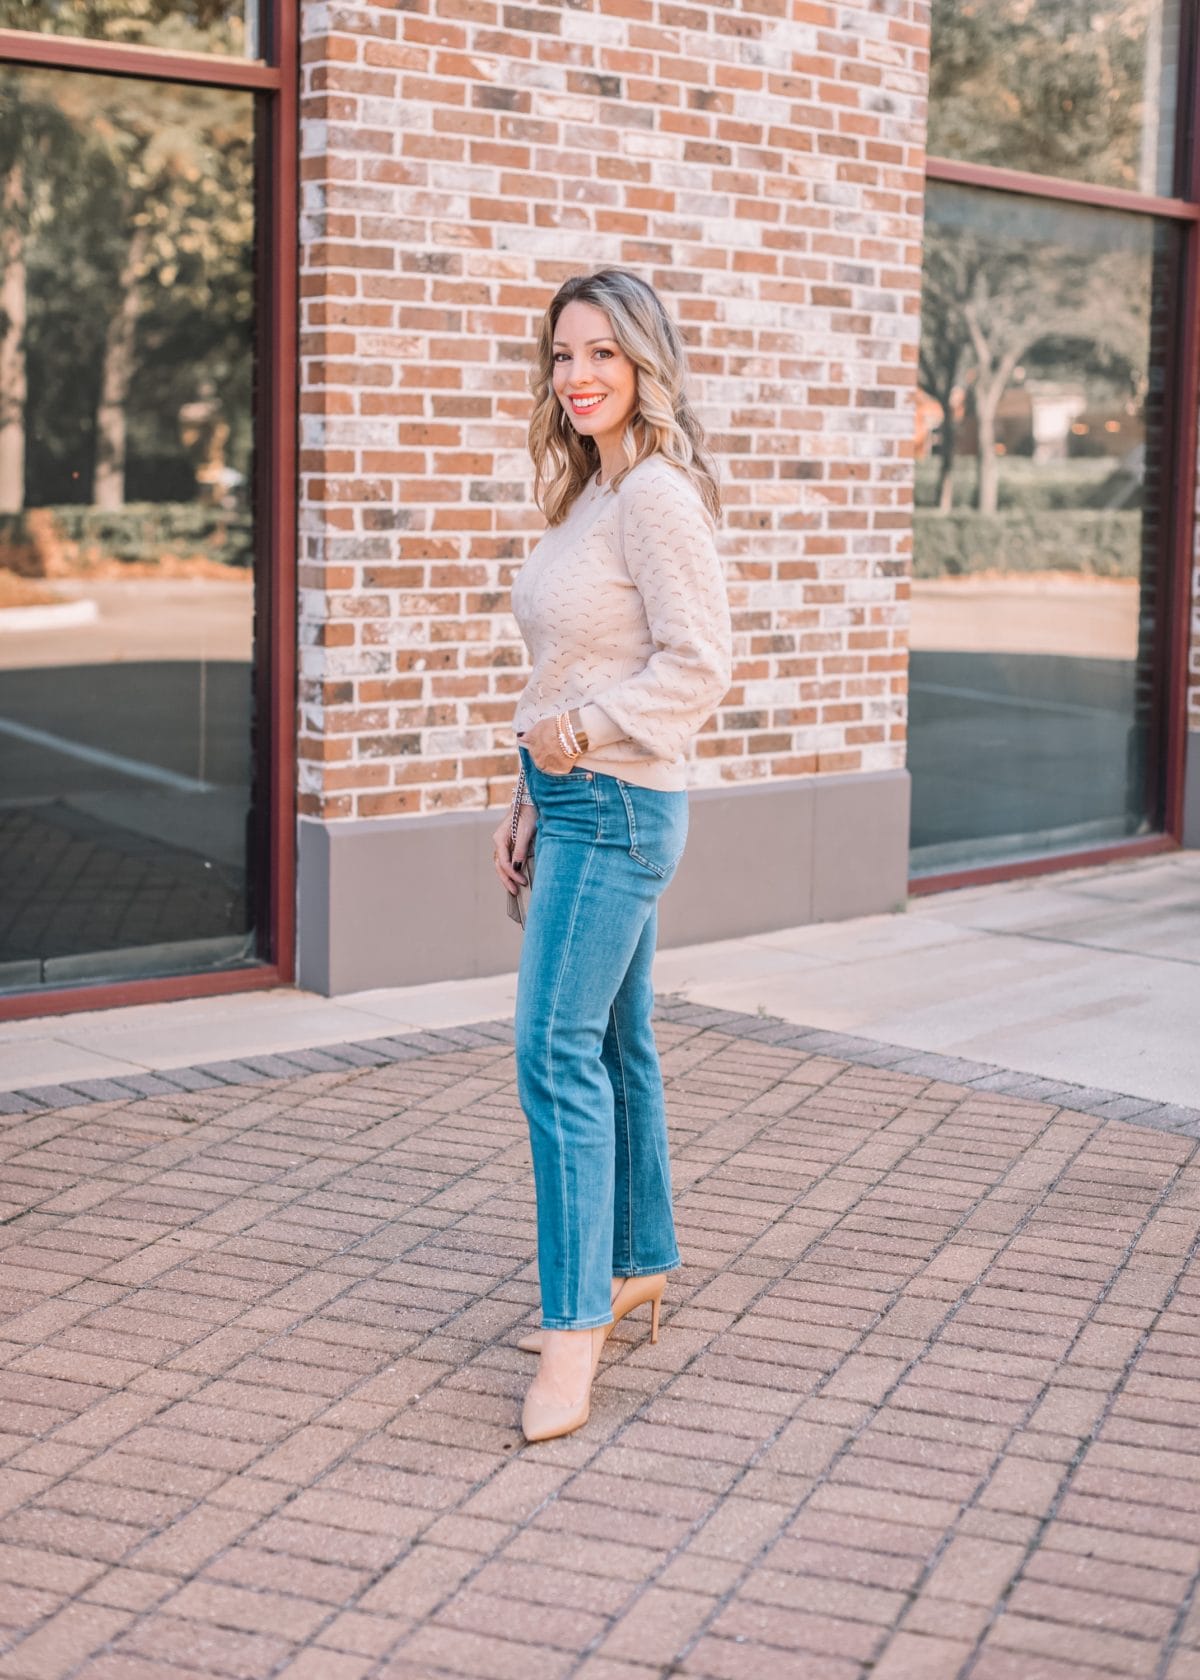 Express Fashion, Pointinelle Sweater, Jeans, Heels 